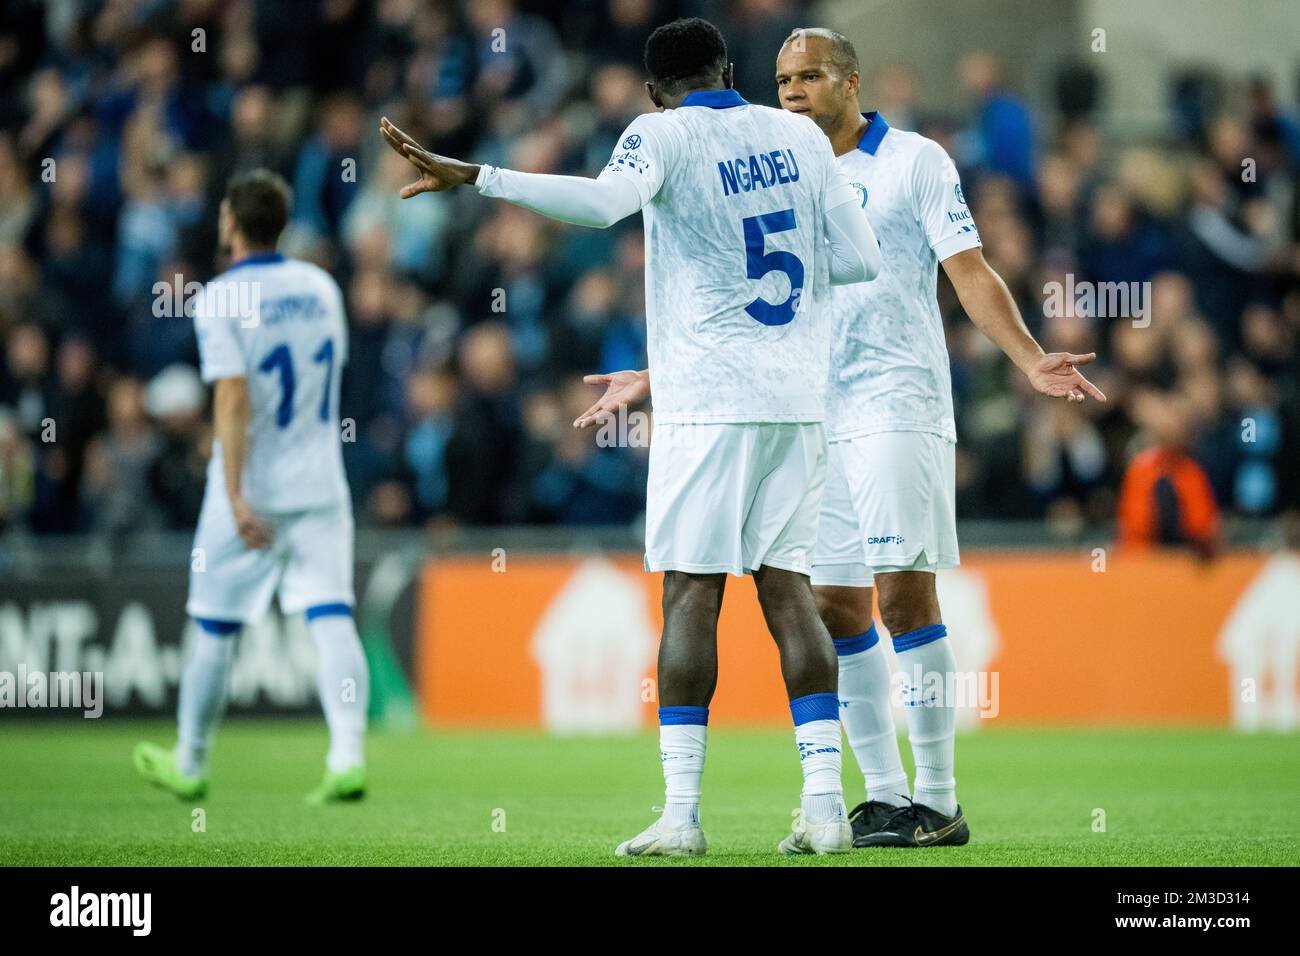 Gent's Vadis Odjidja-Ofoe and Gent's Michael Ngadeu reacts during a soccer match between Swedish Djurgardens IF and Belgian KAA Gent, Thursday 13 October 2022 in Stockholm, Sweden , on day four of the UEFA Europa Conference League group stage. BELGA PHOTO JASPER JACOBS Stock Photo